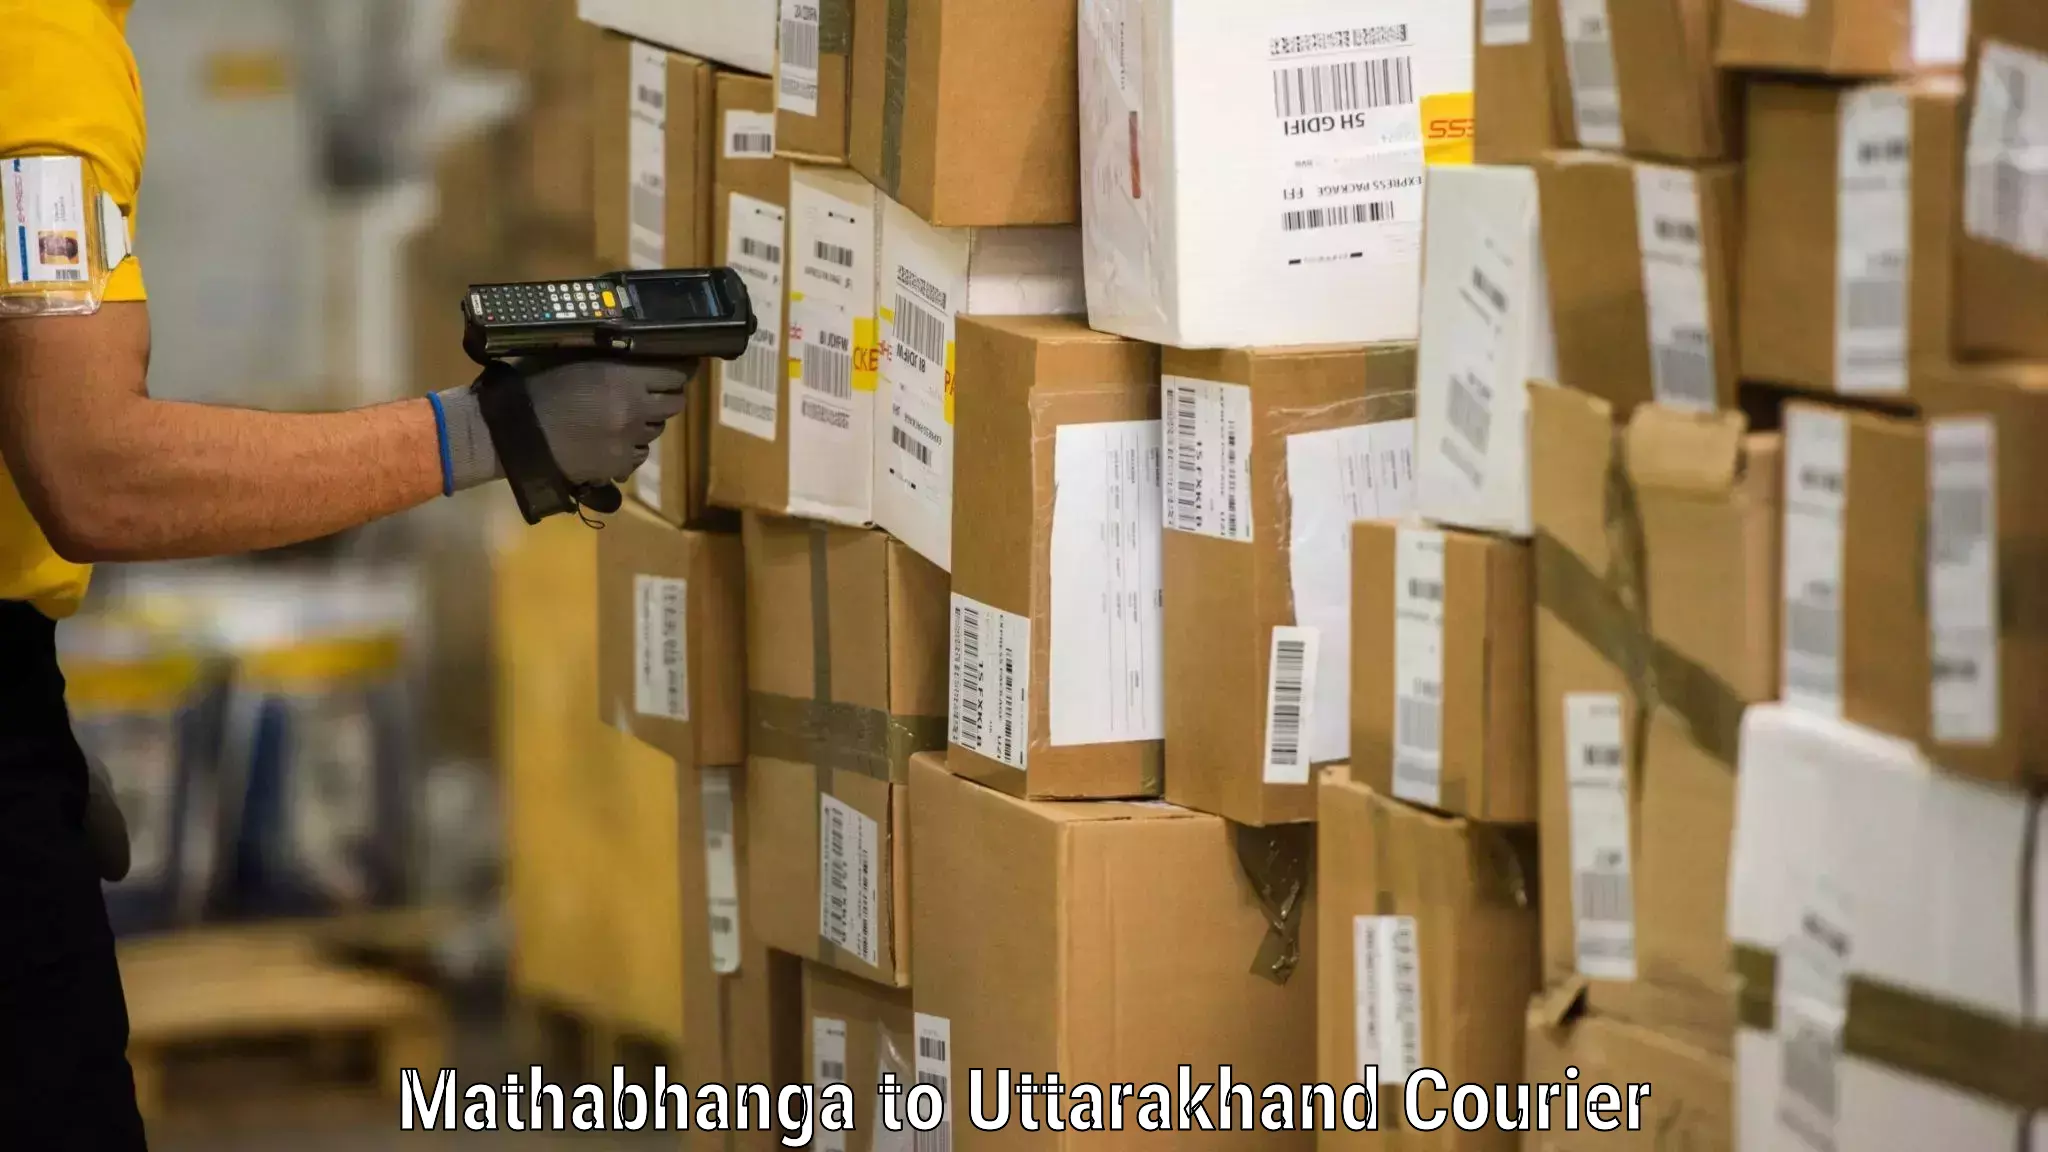 Quality relocation services in Mathabhanga to Uttarakhand